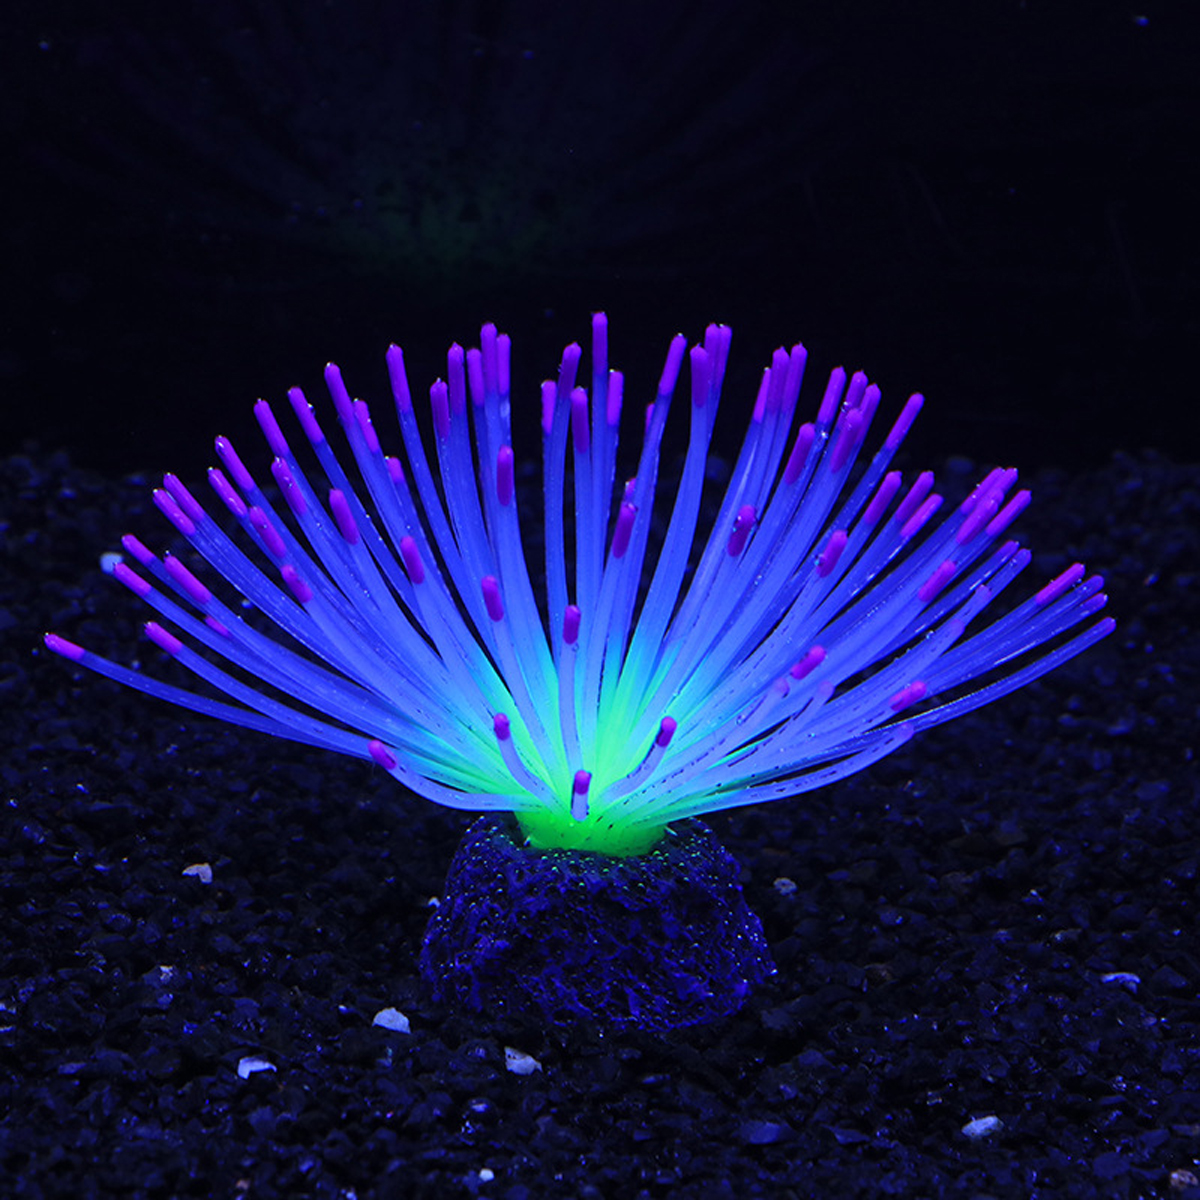 1/2/6/10pcs Aquarium Imitative Rainbow and Iridescent Blue Sea Urchin Balls Artificial Silicone Ornament Set with Glowing Effect for Fish Tank Landscape Decoration - image 1 of 2